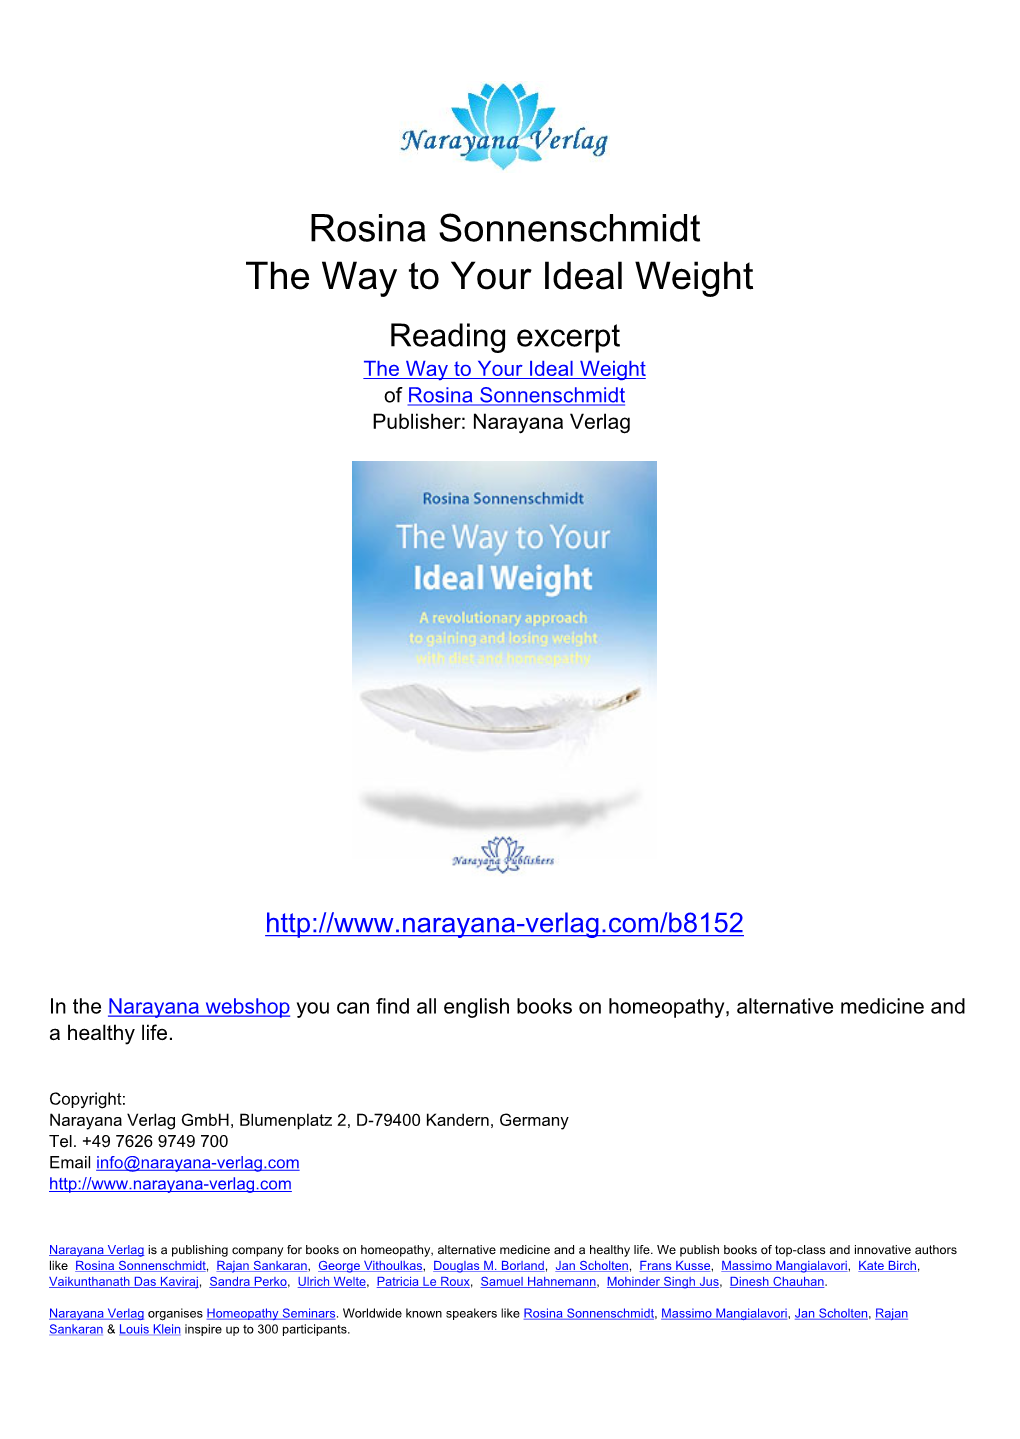 Rosina Sonnenschmidt the Way to Your Ideal Weight Reading Excerpt the Way to Your Ideal Weight of Rosina Sonnenschmidt Publisher: Narayana Verlag